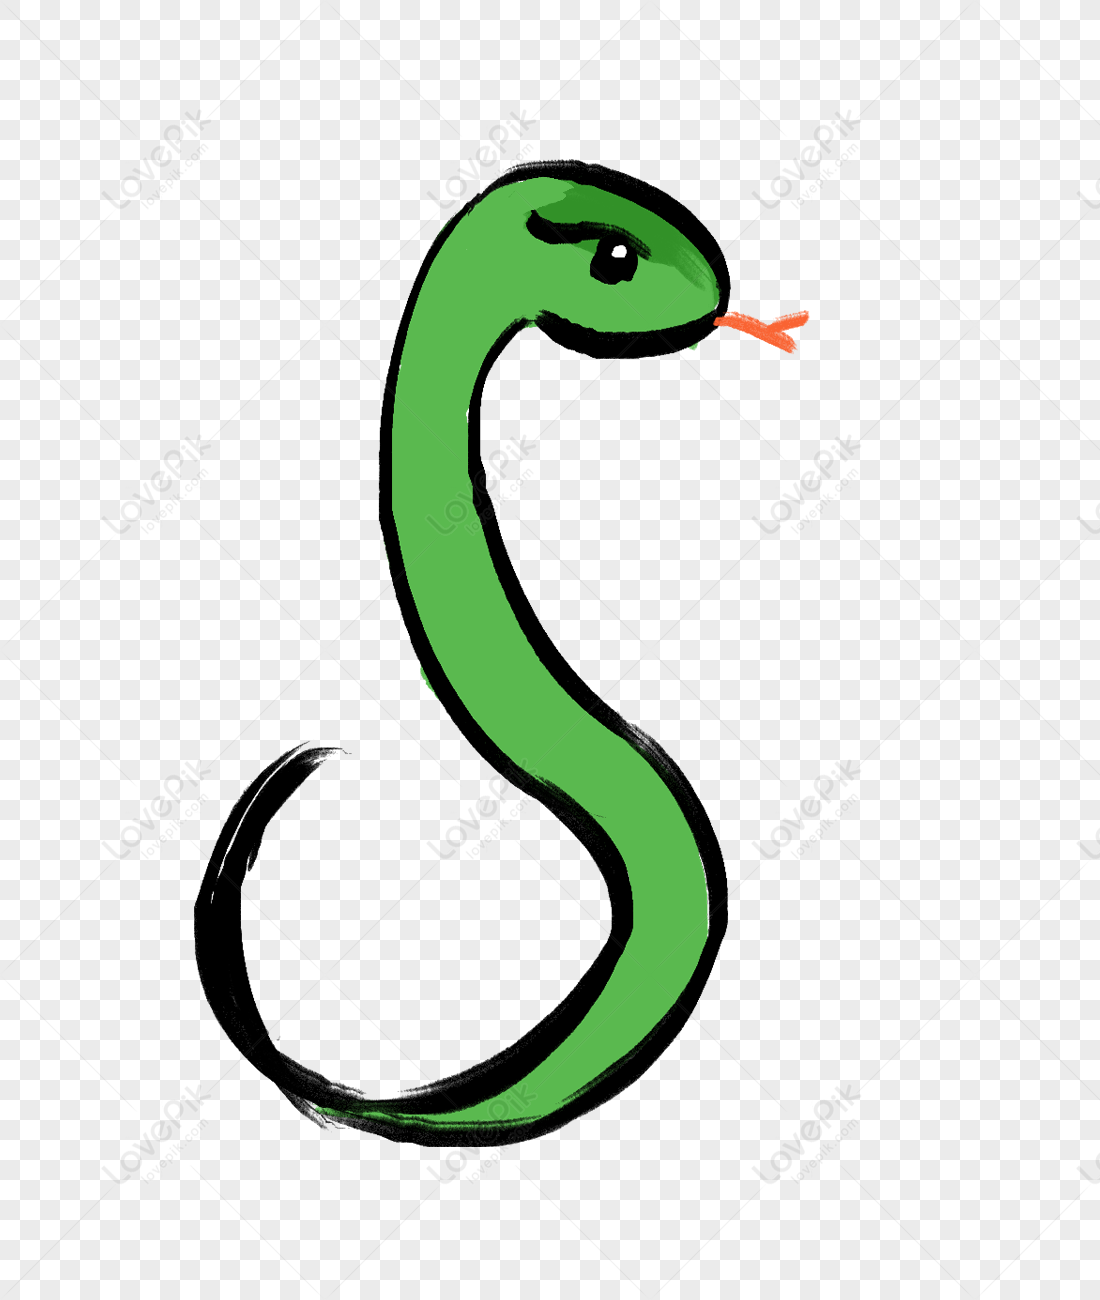 Green Snake PNG White Transparent And Clipart Image For Free Download -  Lovepik | 400230812